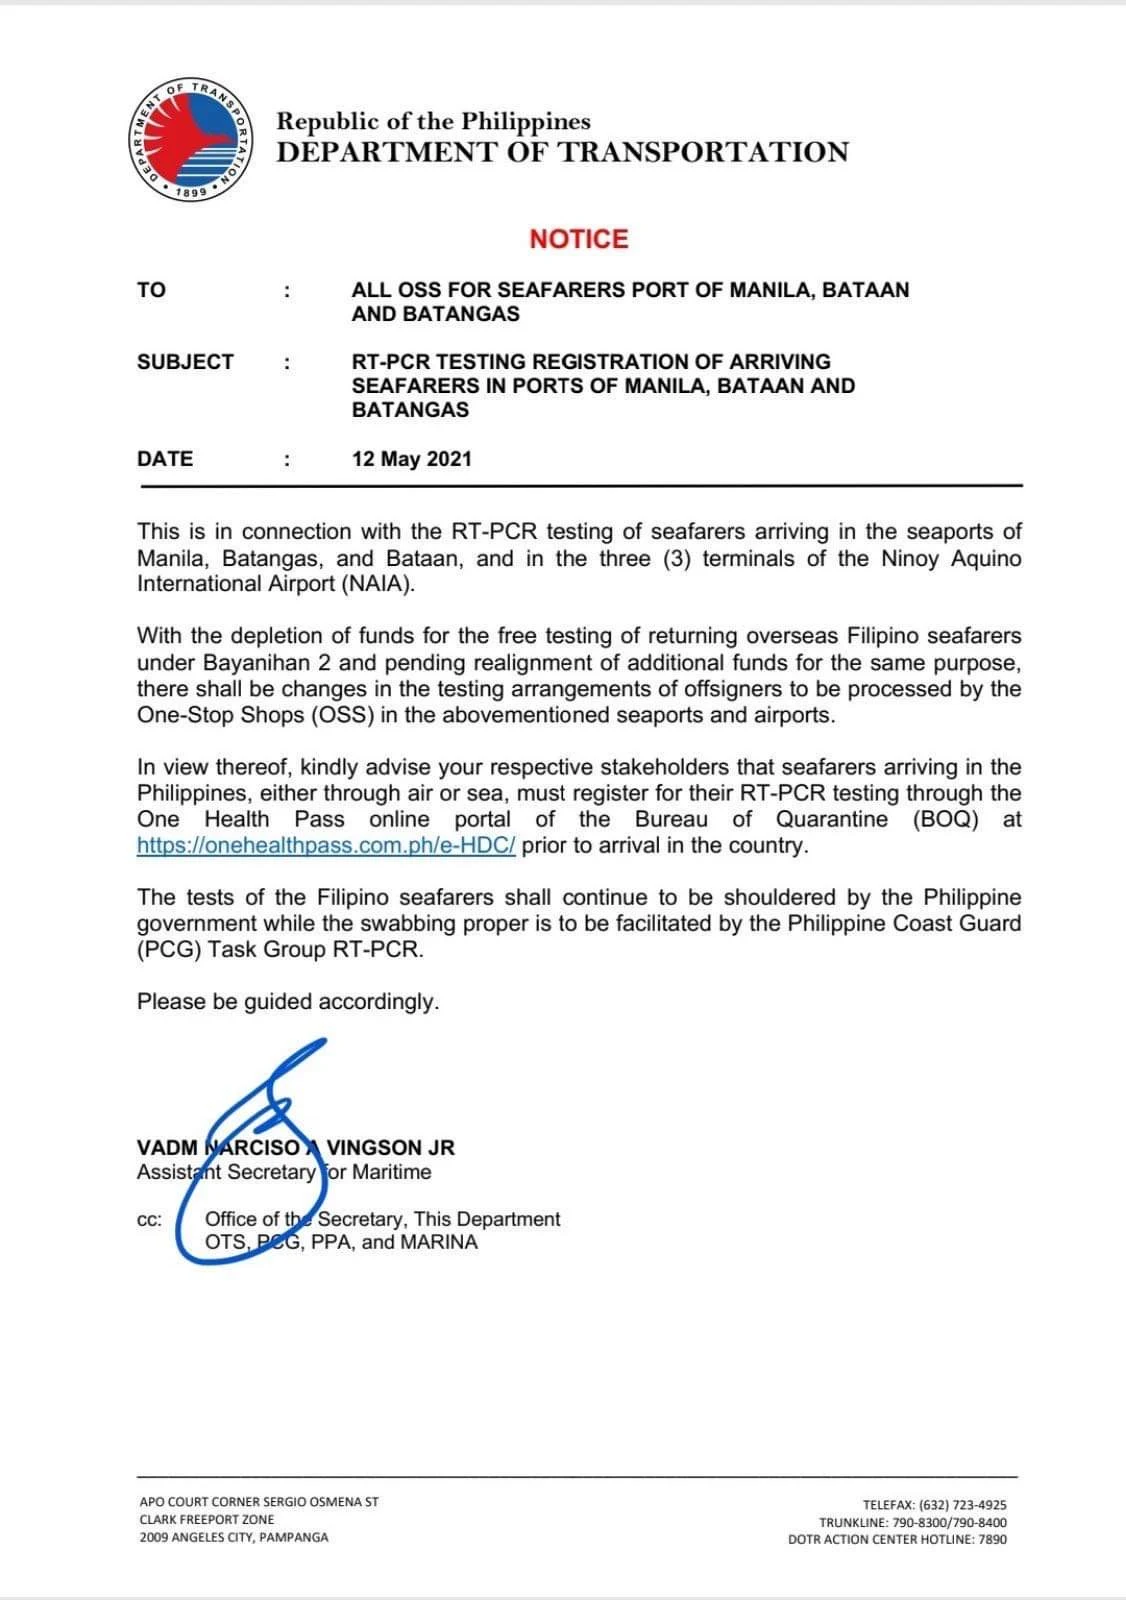 Department of Transportation Notice re RT-PCR Registration of Arriving Seafarers in Ports of Manila, Bataan and Batangas dated 12 May 2021